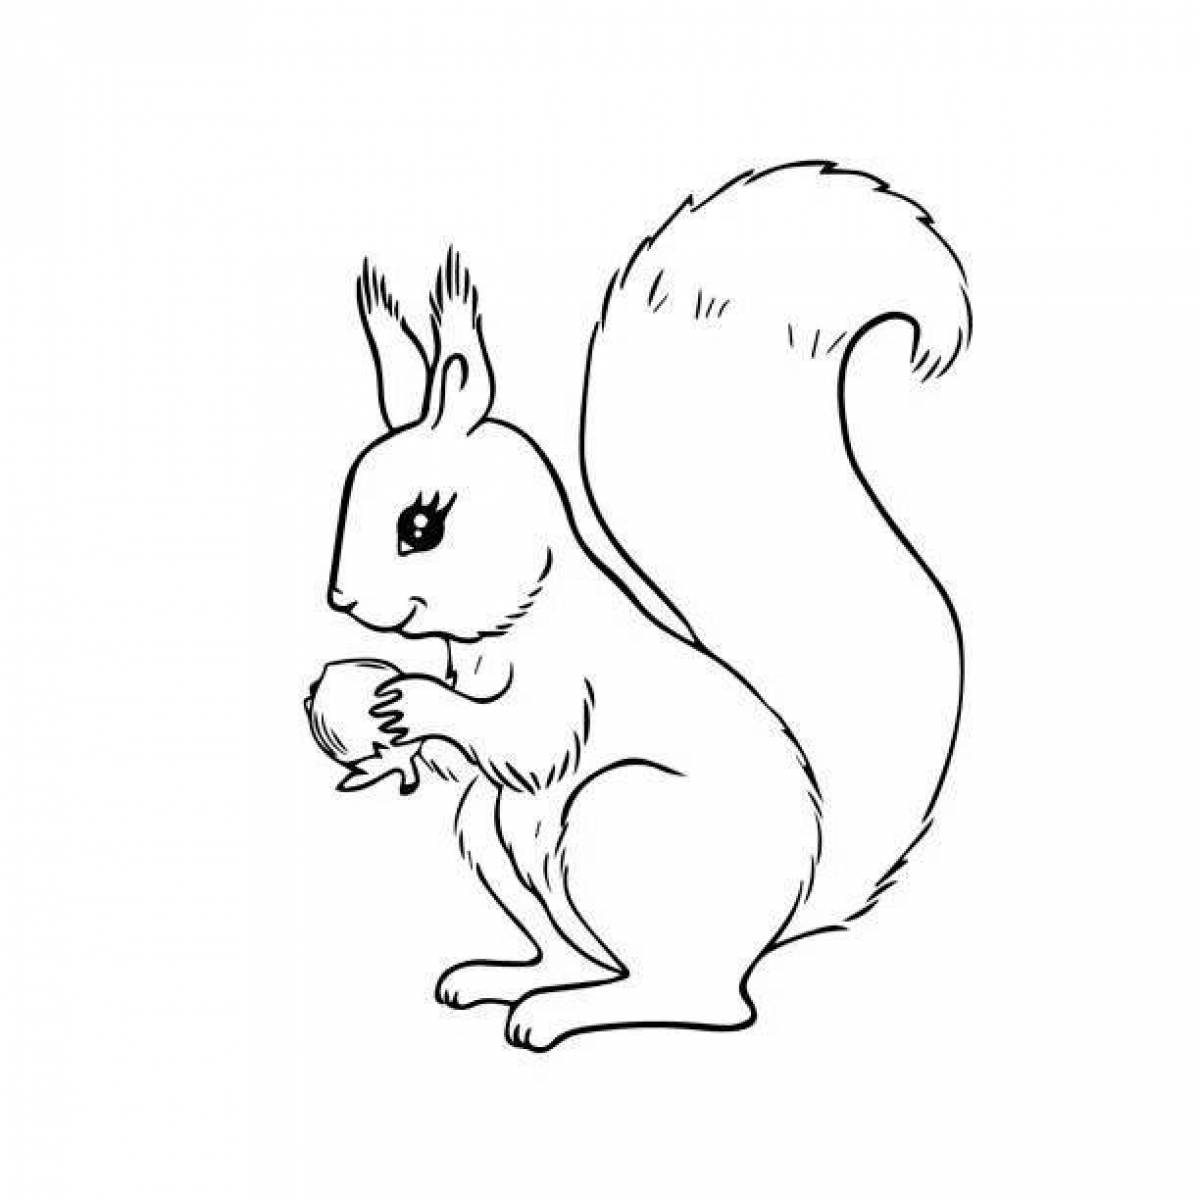 Interesting coloring book squirrel for children 3-4 years old